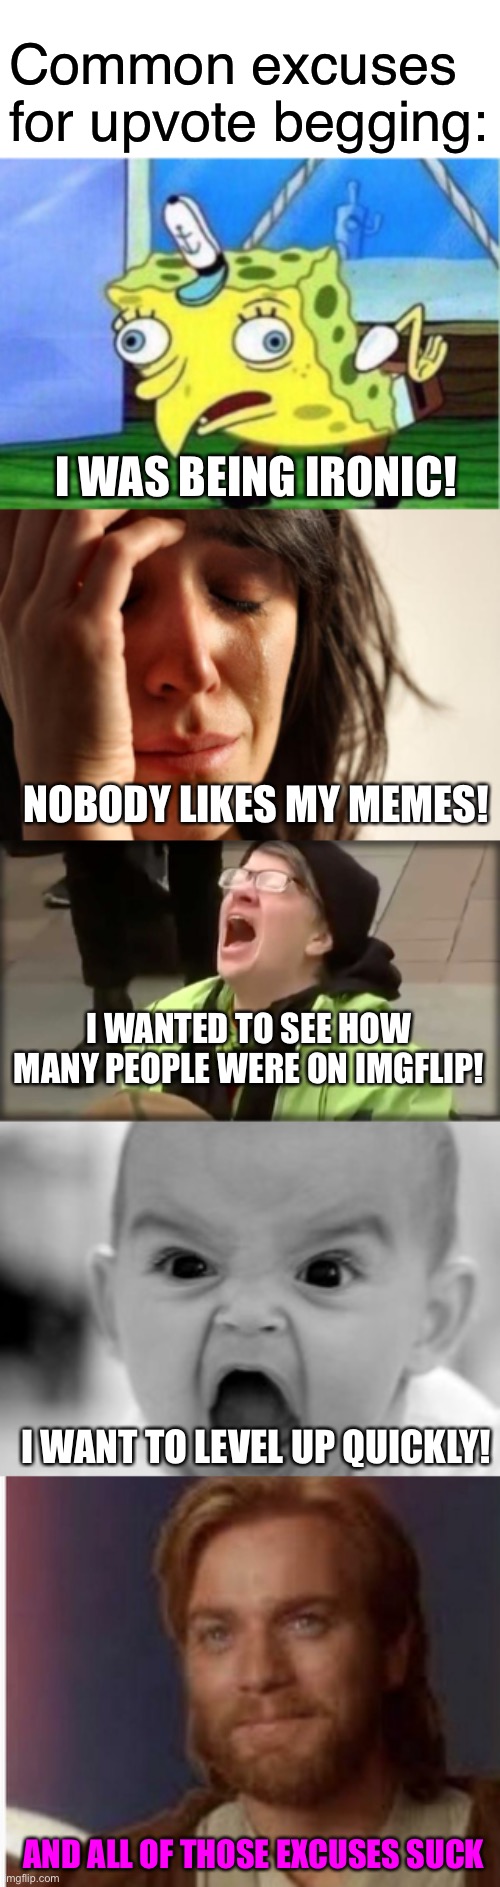 Common excuses for upvote begging | Common excuses for upvote begging:; I WAS BEING IRONIC! NOBODY LIKES MY MEMES! I WANTED TO SEE HOW MANY PEOPLE WERE ON IMGFLIP! I WANT TO LEVEL UP QUICKLY! AND ALL OF THOSE EXCUSES SUCK | image tagged in memes,mocking spongebob,upvote begging,first world problems,funny,imgflip users | made w/ Imgflip meme maker